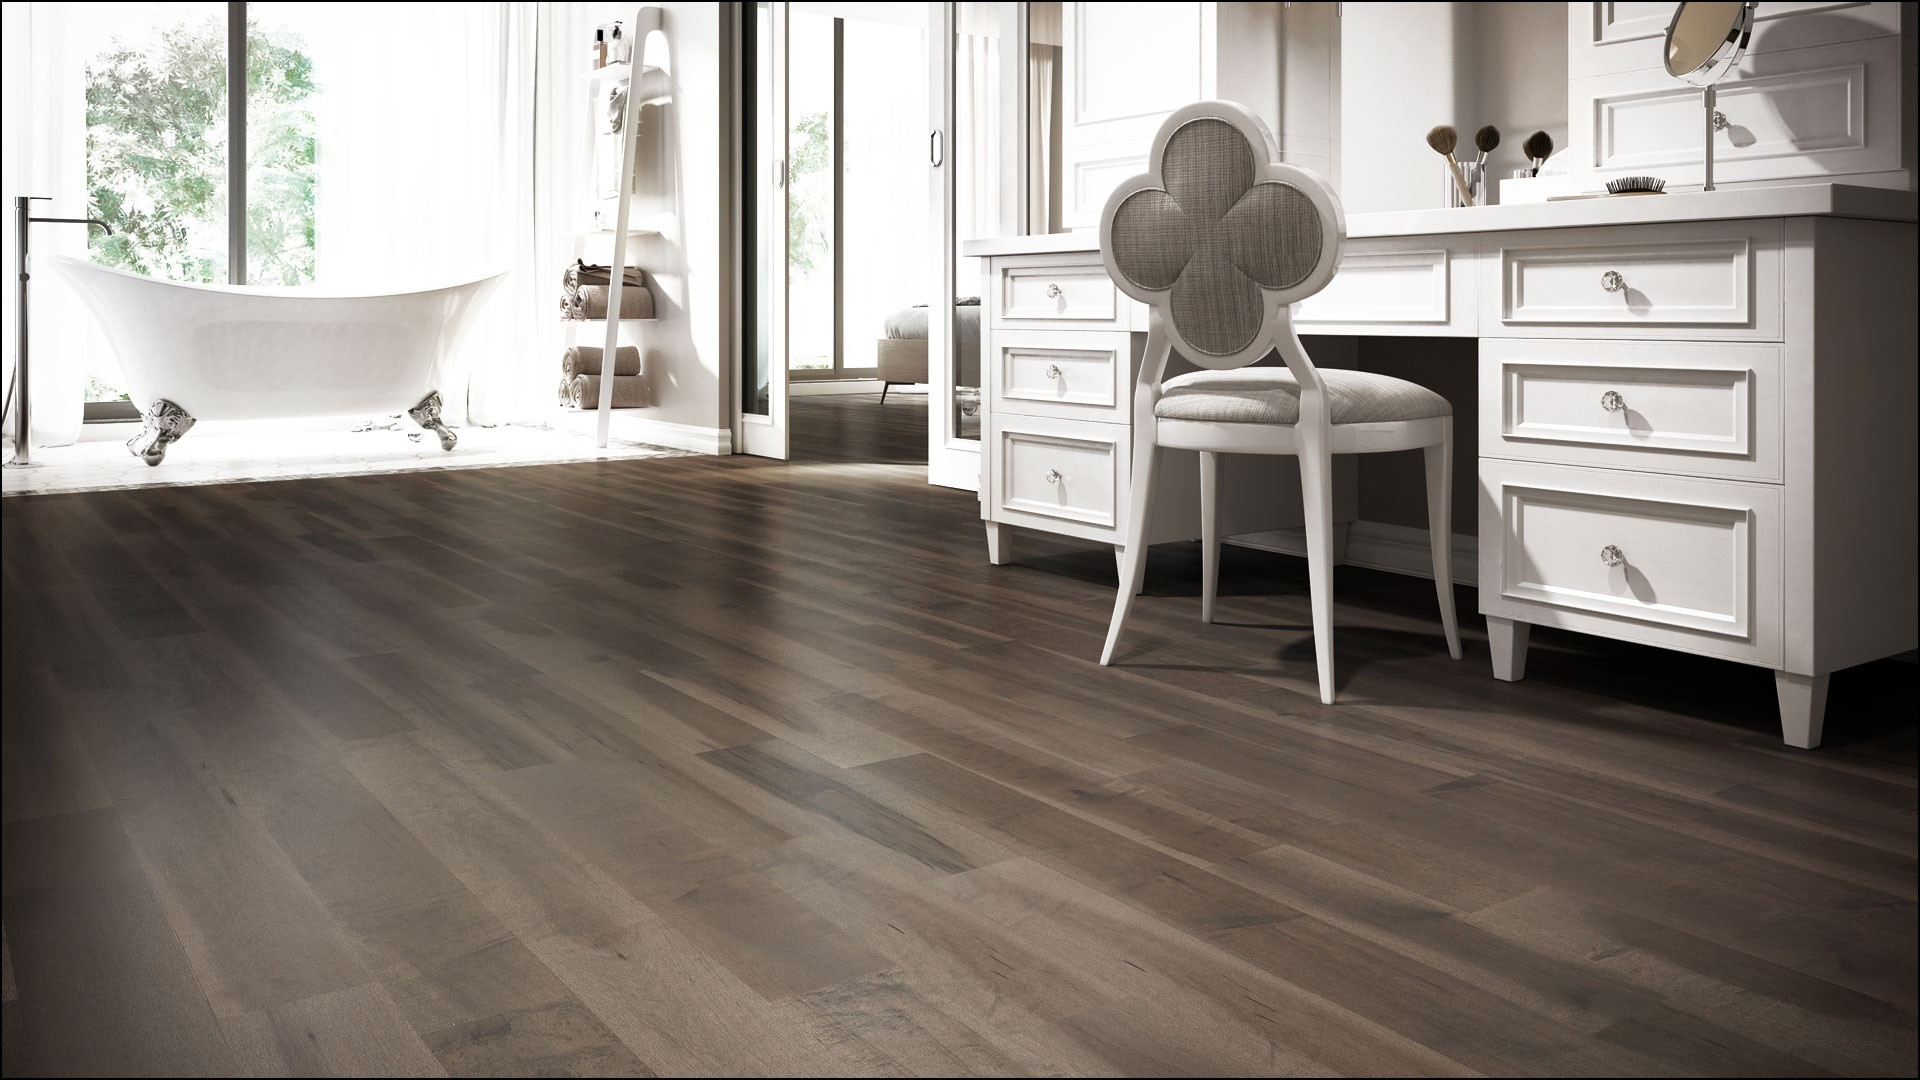 25 Amazing All Hardwood Flooring Depot 2024 free download all hardwood flooring depot of hardwood flooring suppliers france flooring ideas throughout hardwood flooring pictures in homes images black and white laminate flooring beautiful splendid ex